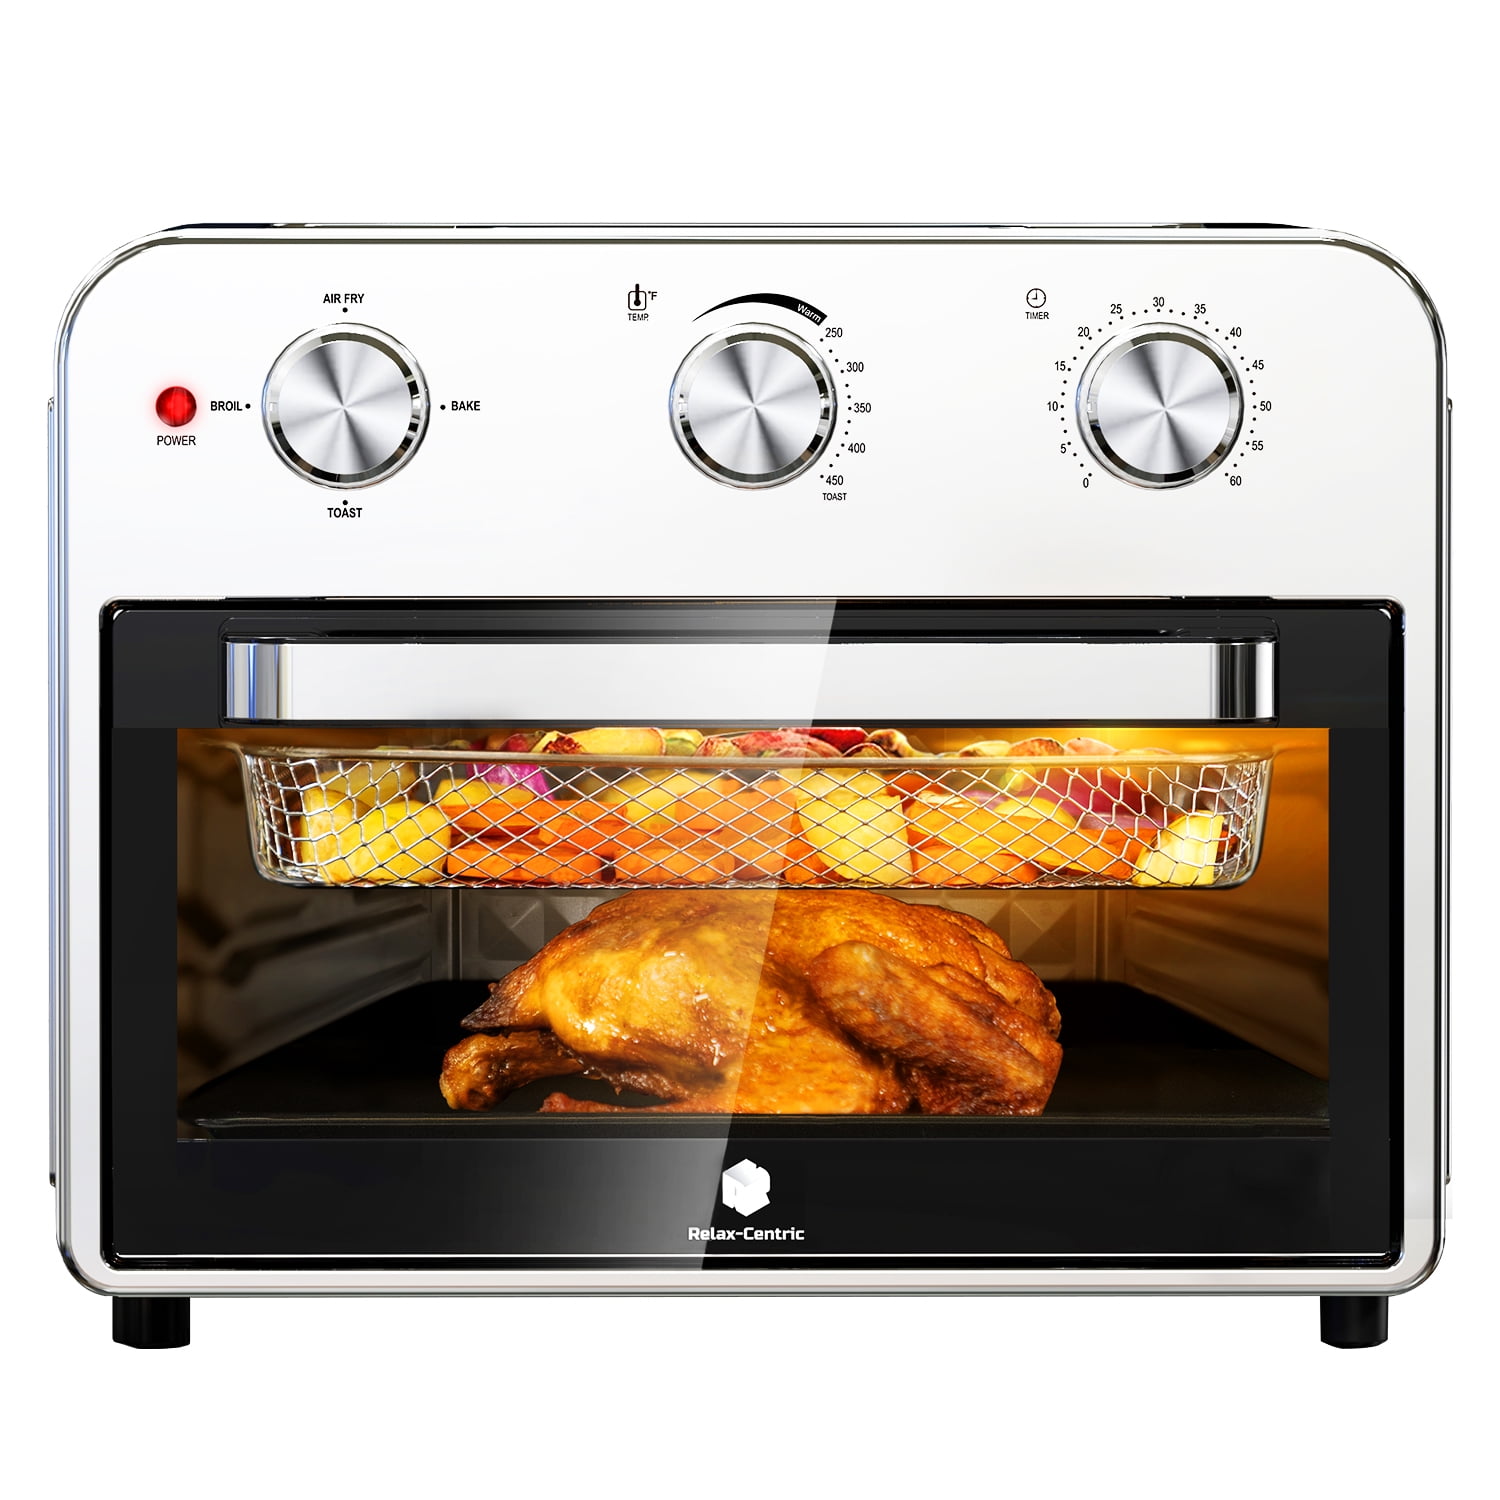 1700W Binkols Air Fryer Oven 25 Quart, 7-in-1 Large Toaster Oven